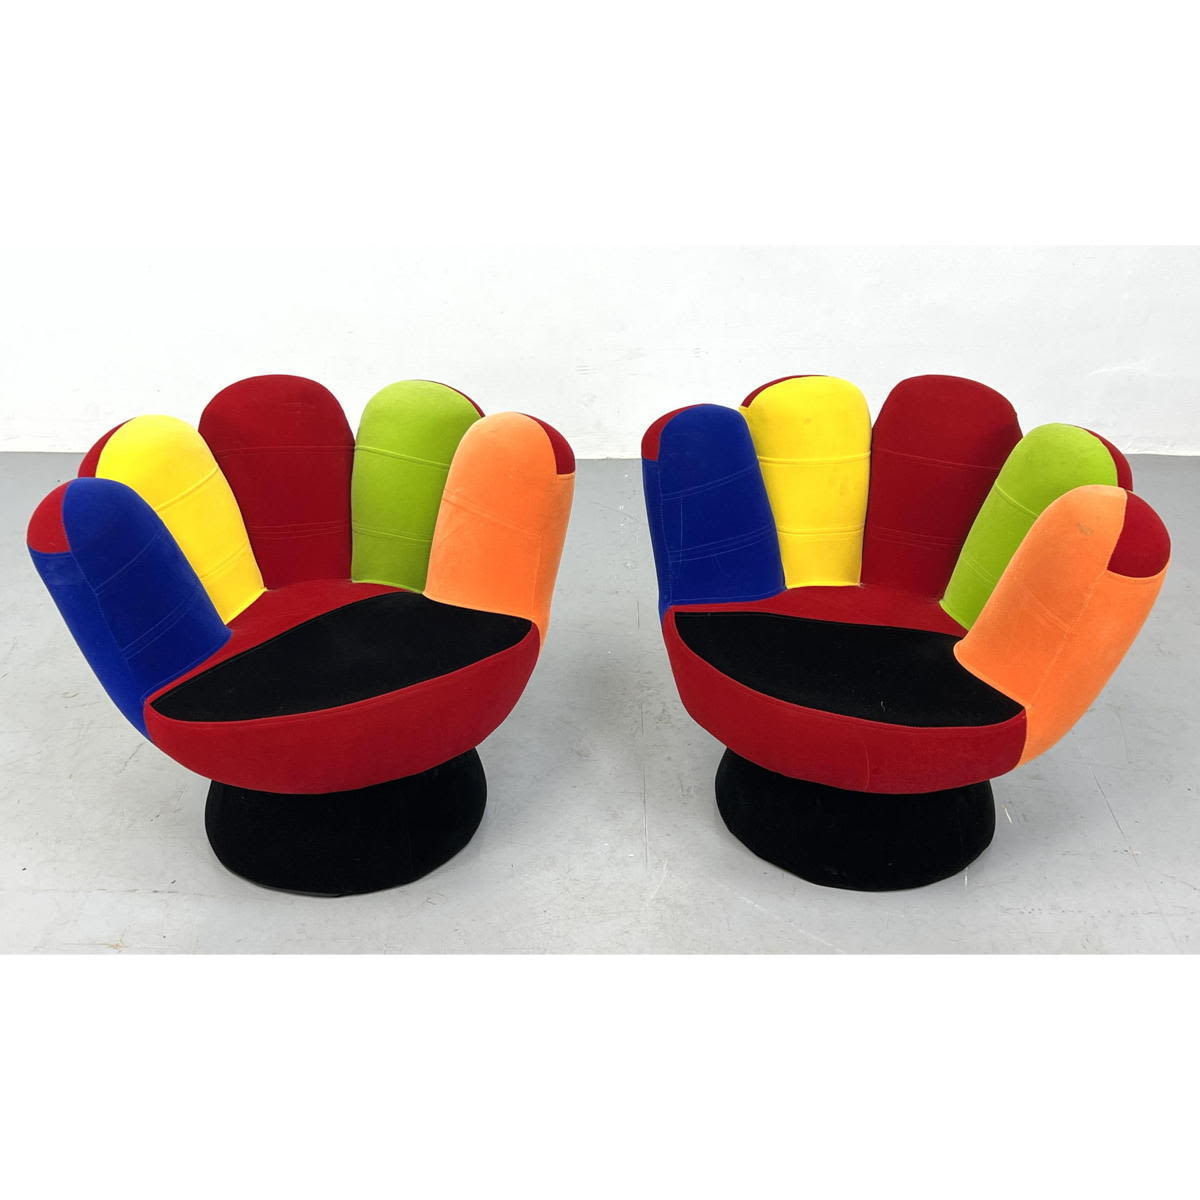 Pr Colorful Upholstered Child's